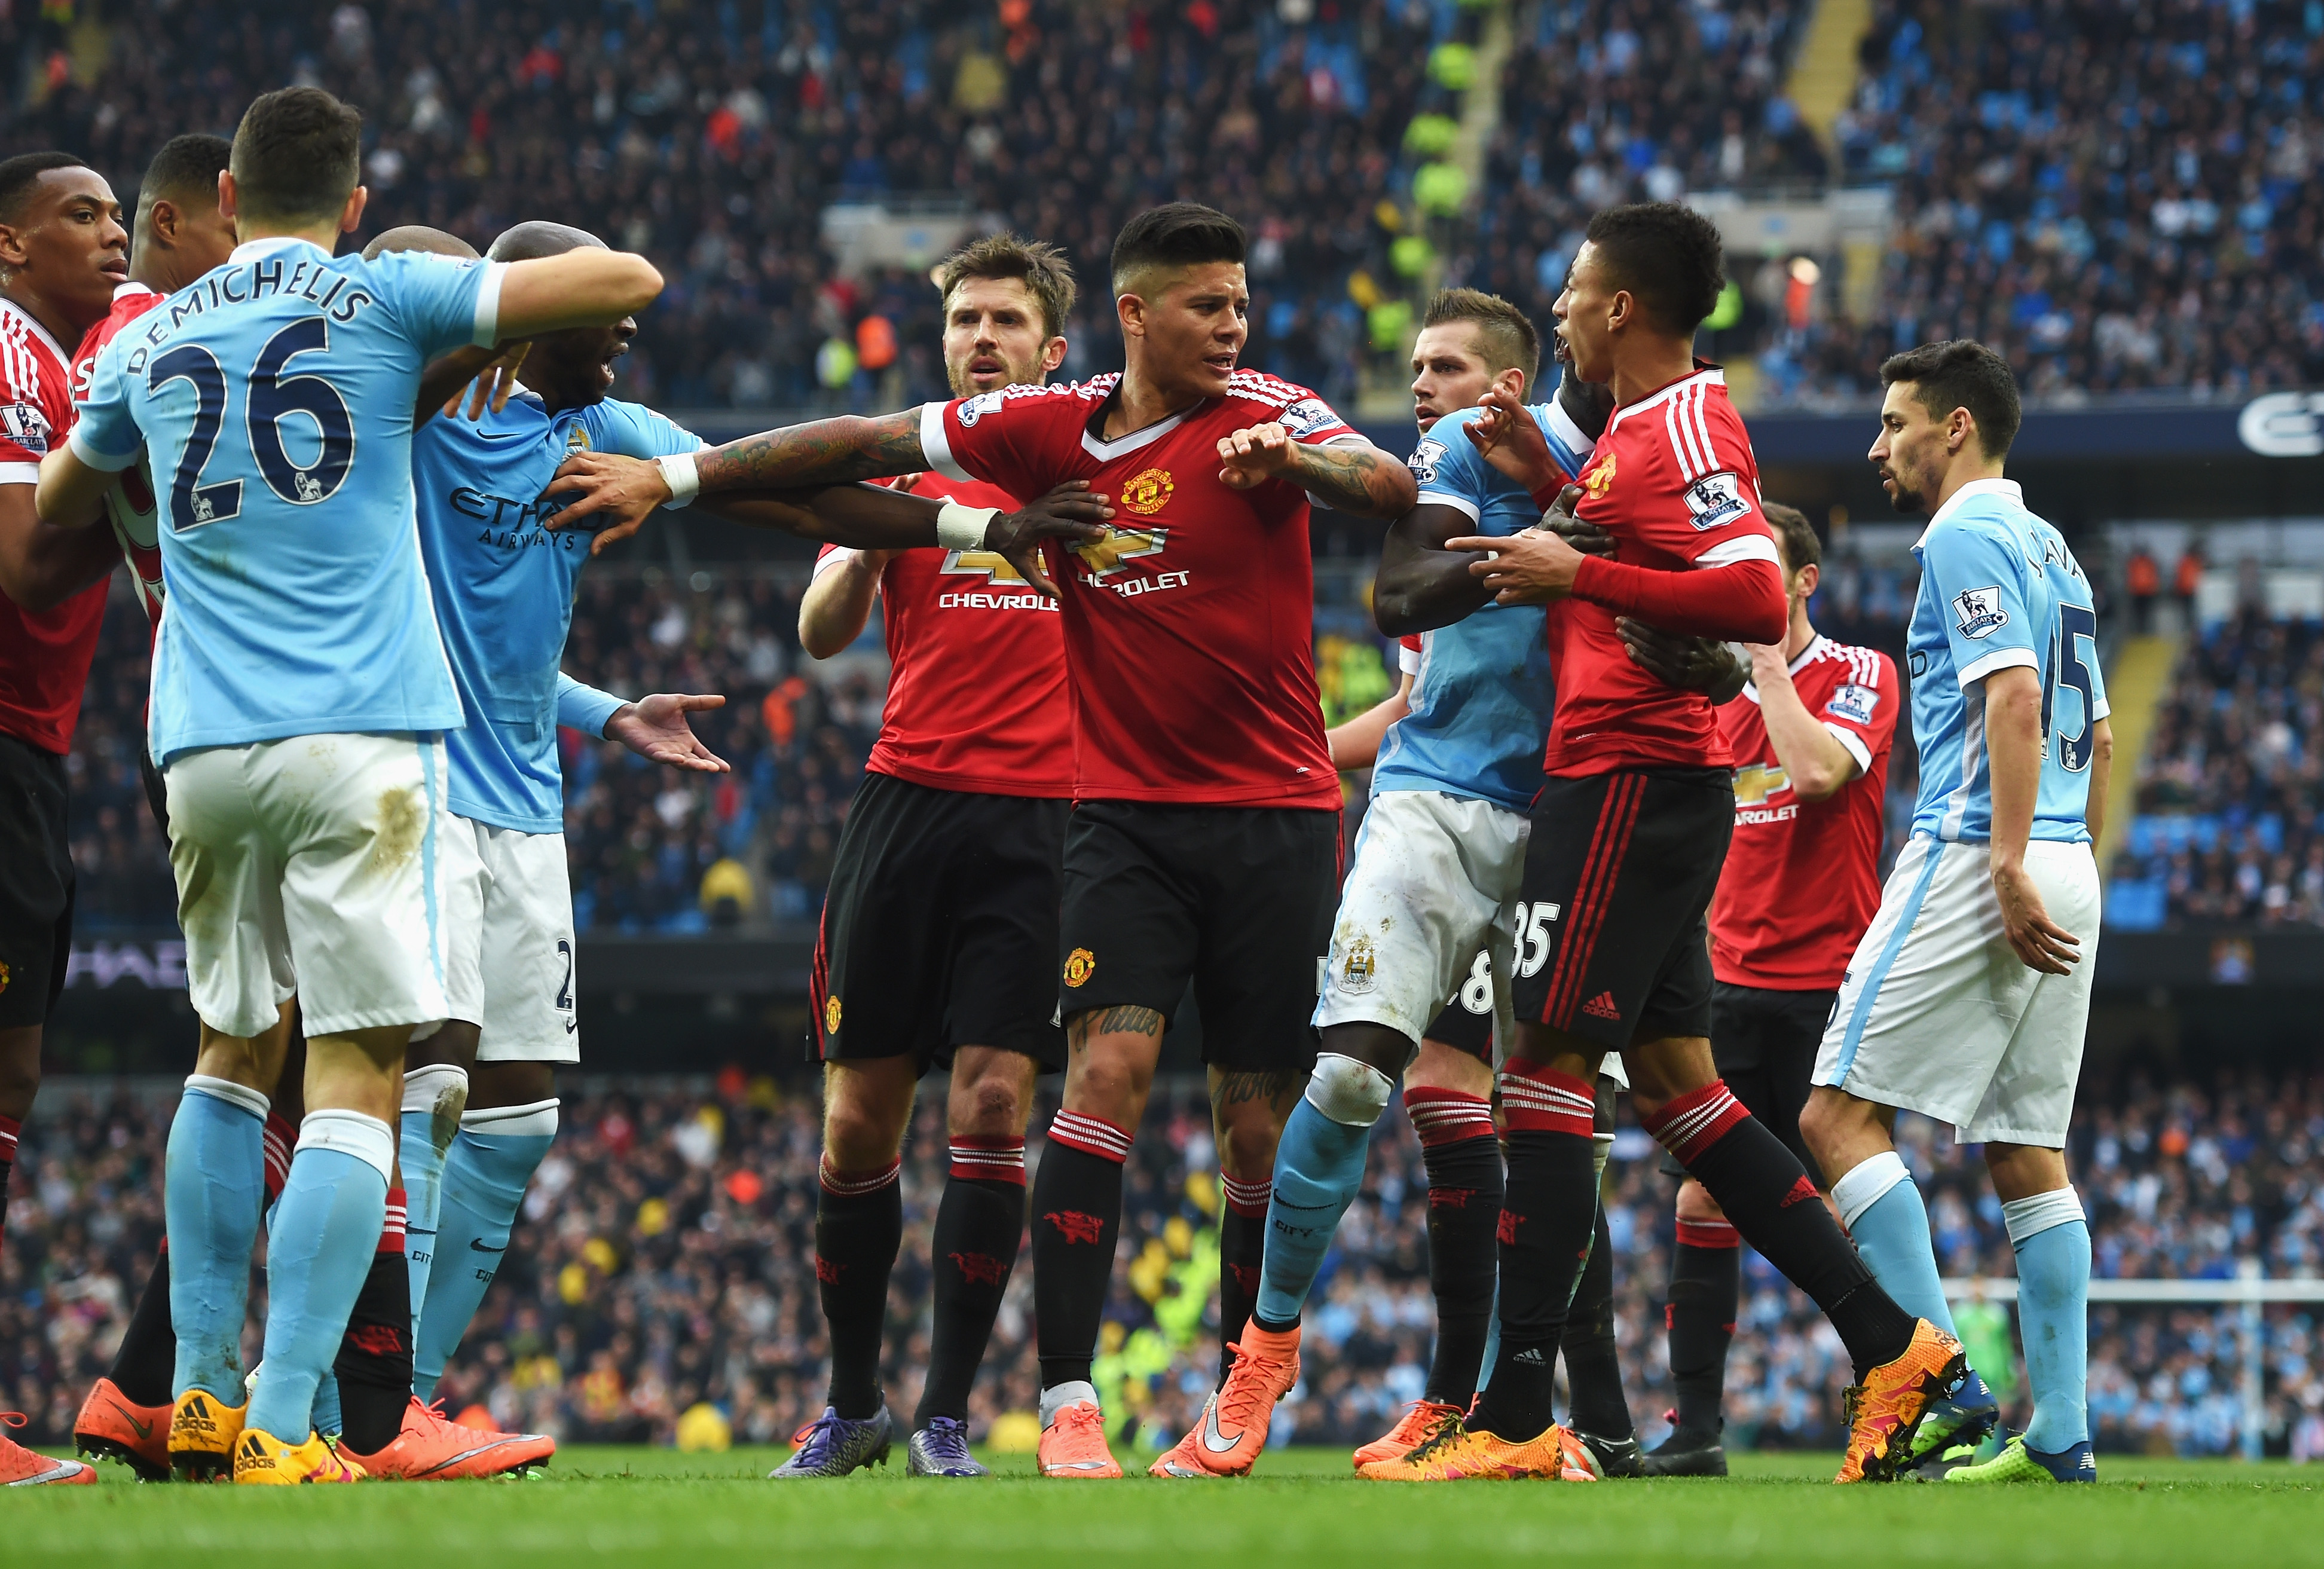 5 interesting facts about the Manchester Derby you might not know!